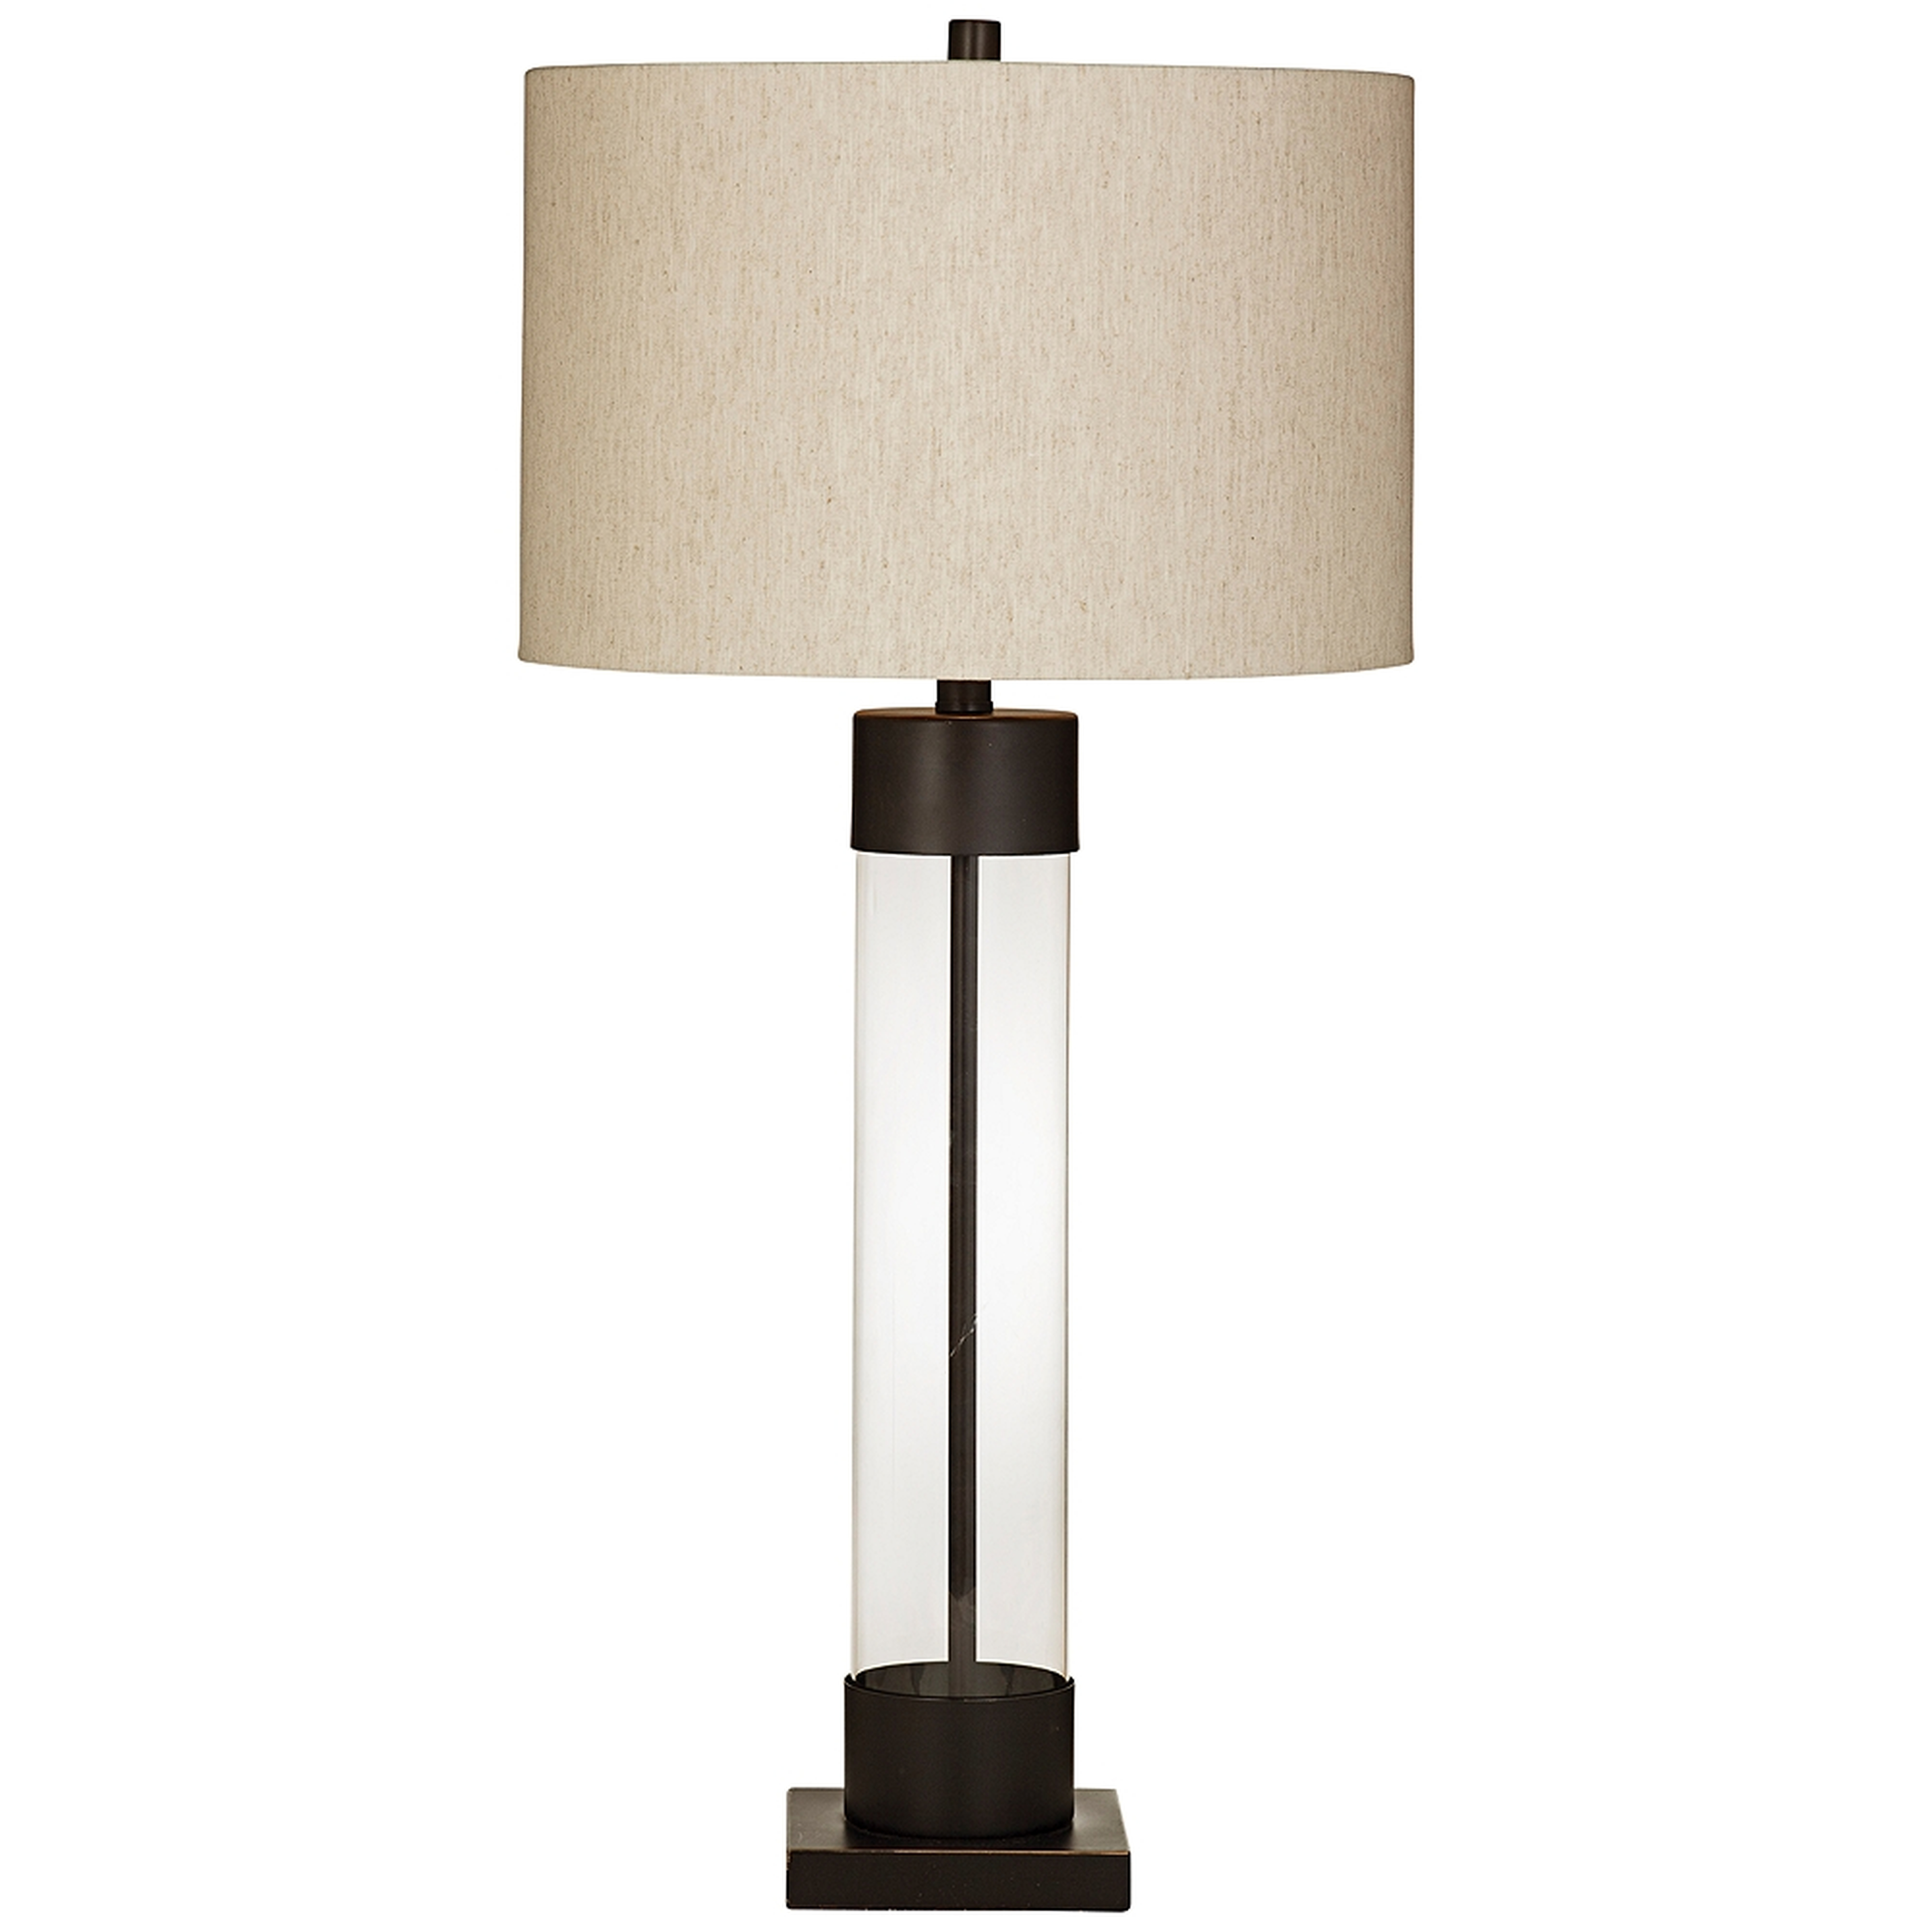 Brannan Bronze and Glass Table Lamp - Style # 58K99 - Lamps Plus